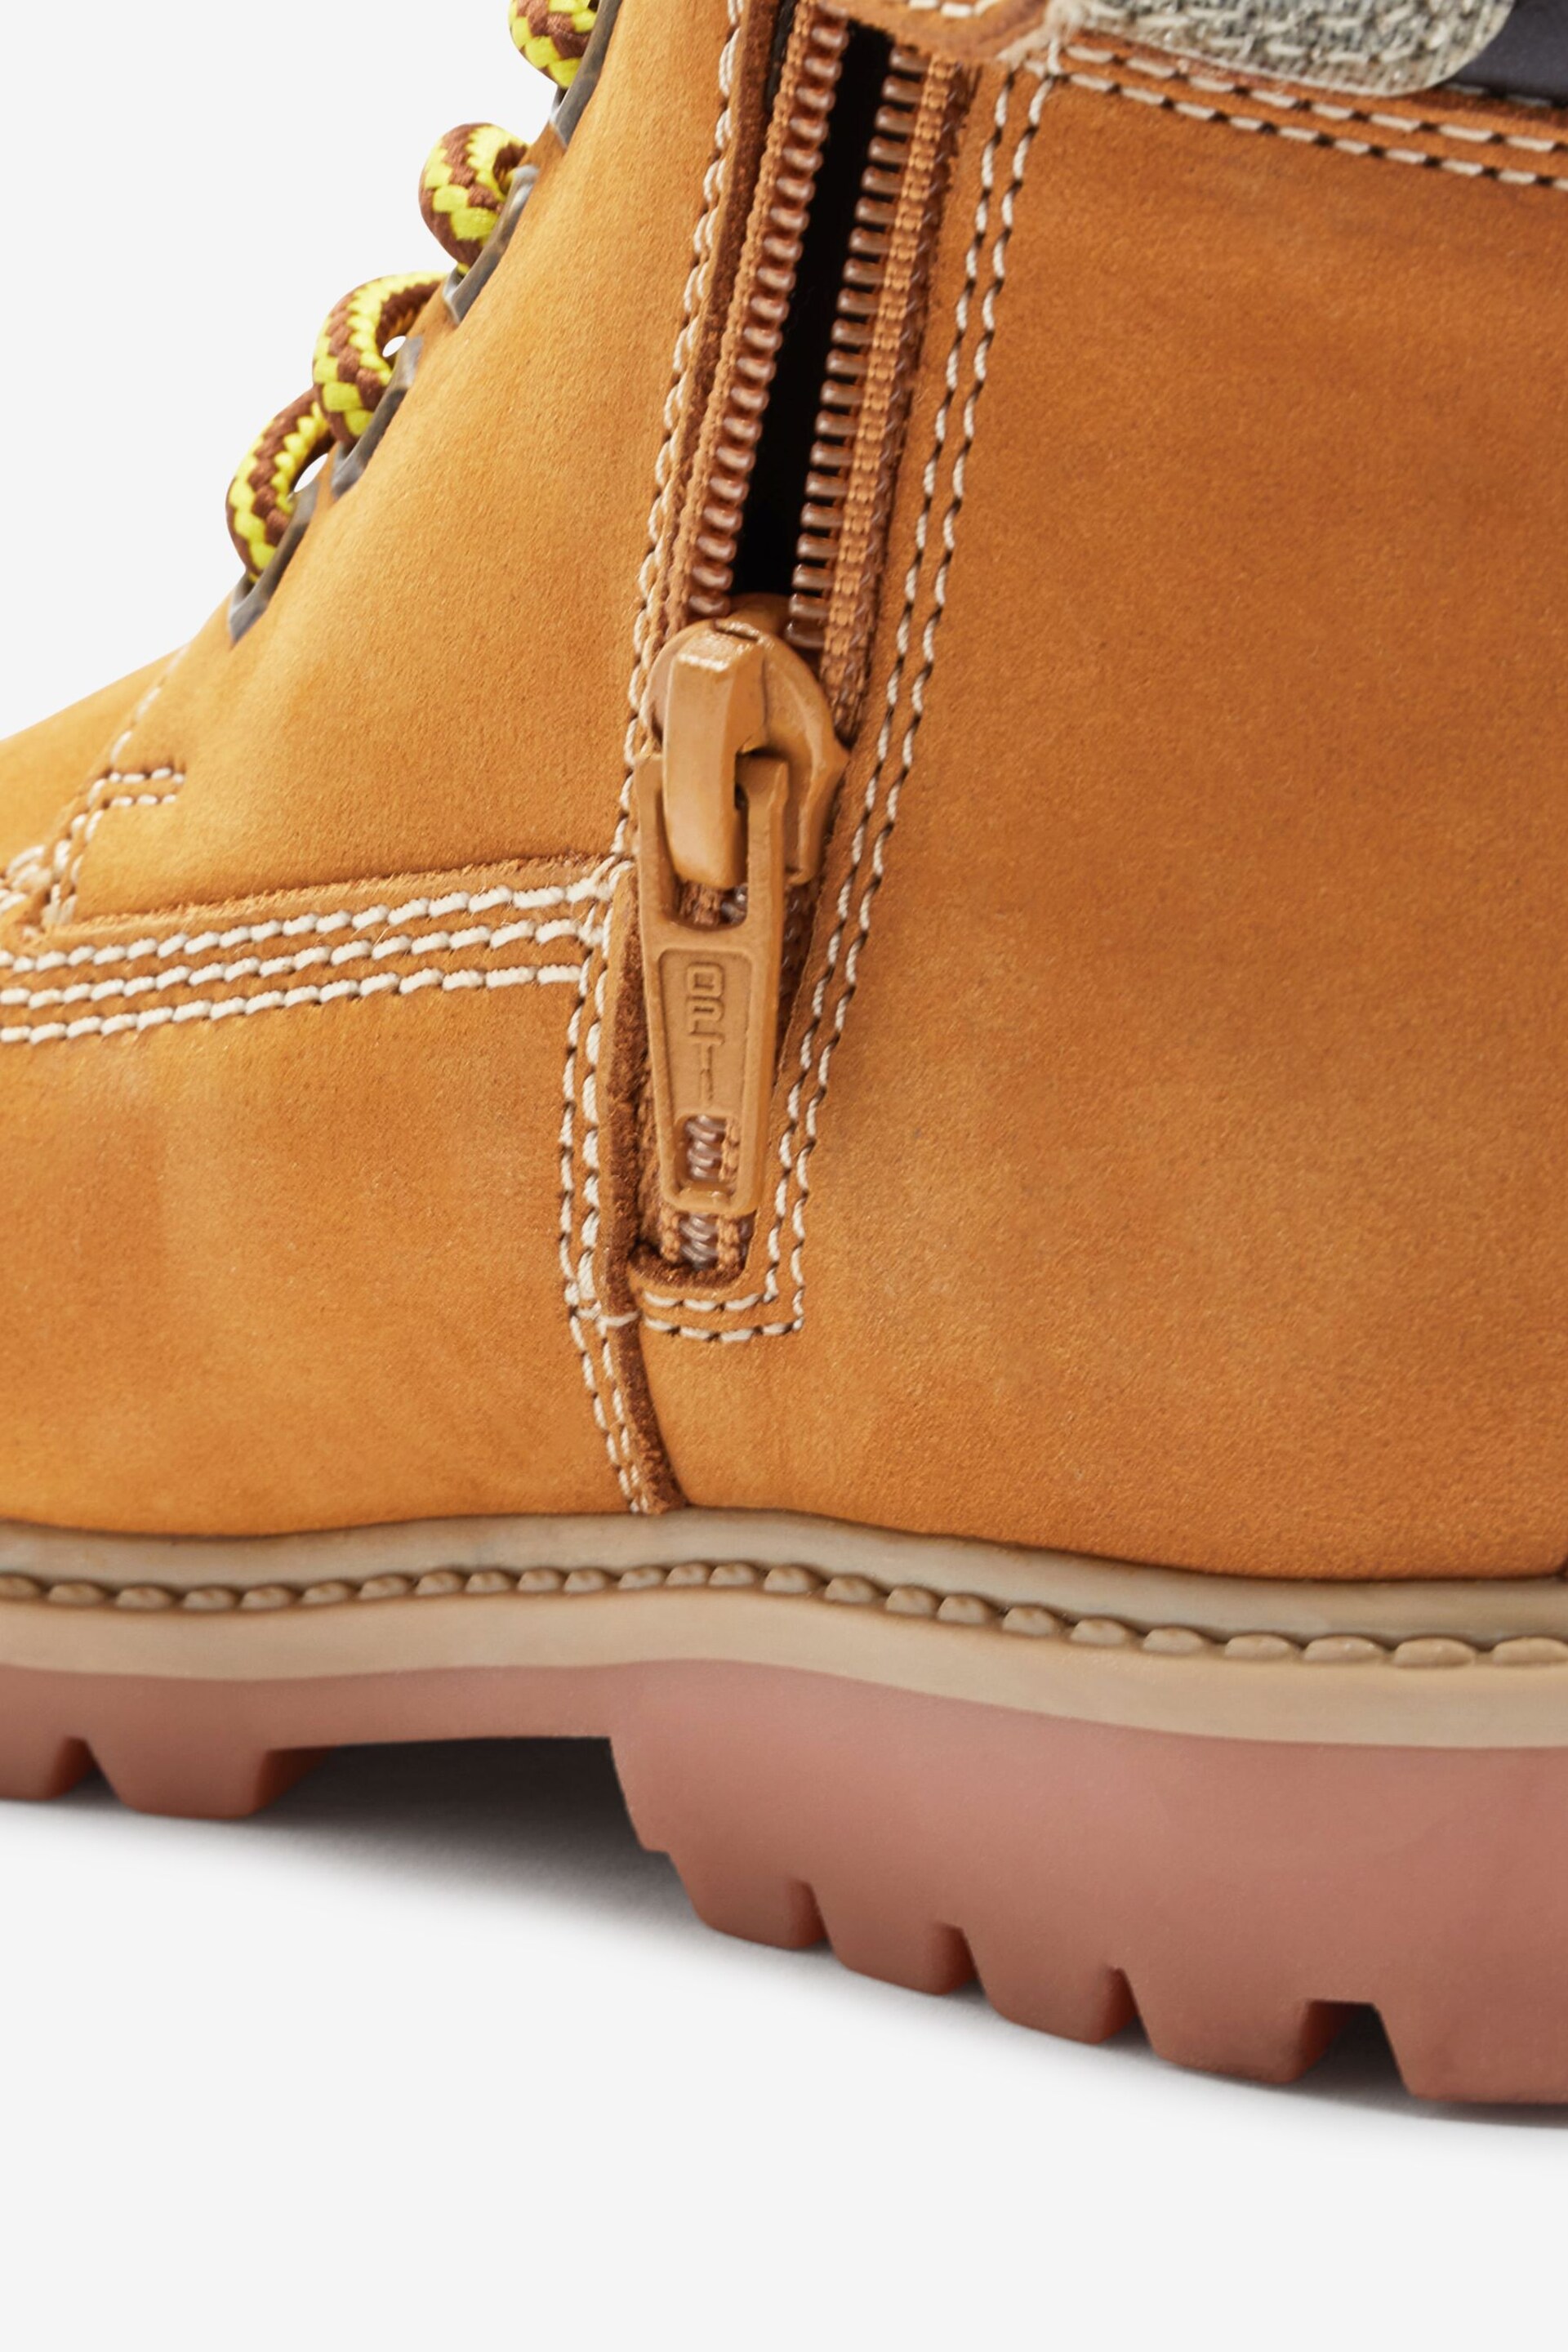 Honey Tan Brown Standard Fit (F) Leather Thermal Thinsulate Lined Work Boots - Image 5 of 5